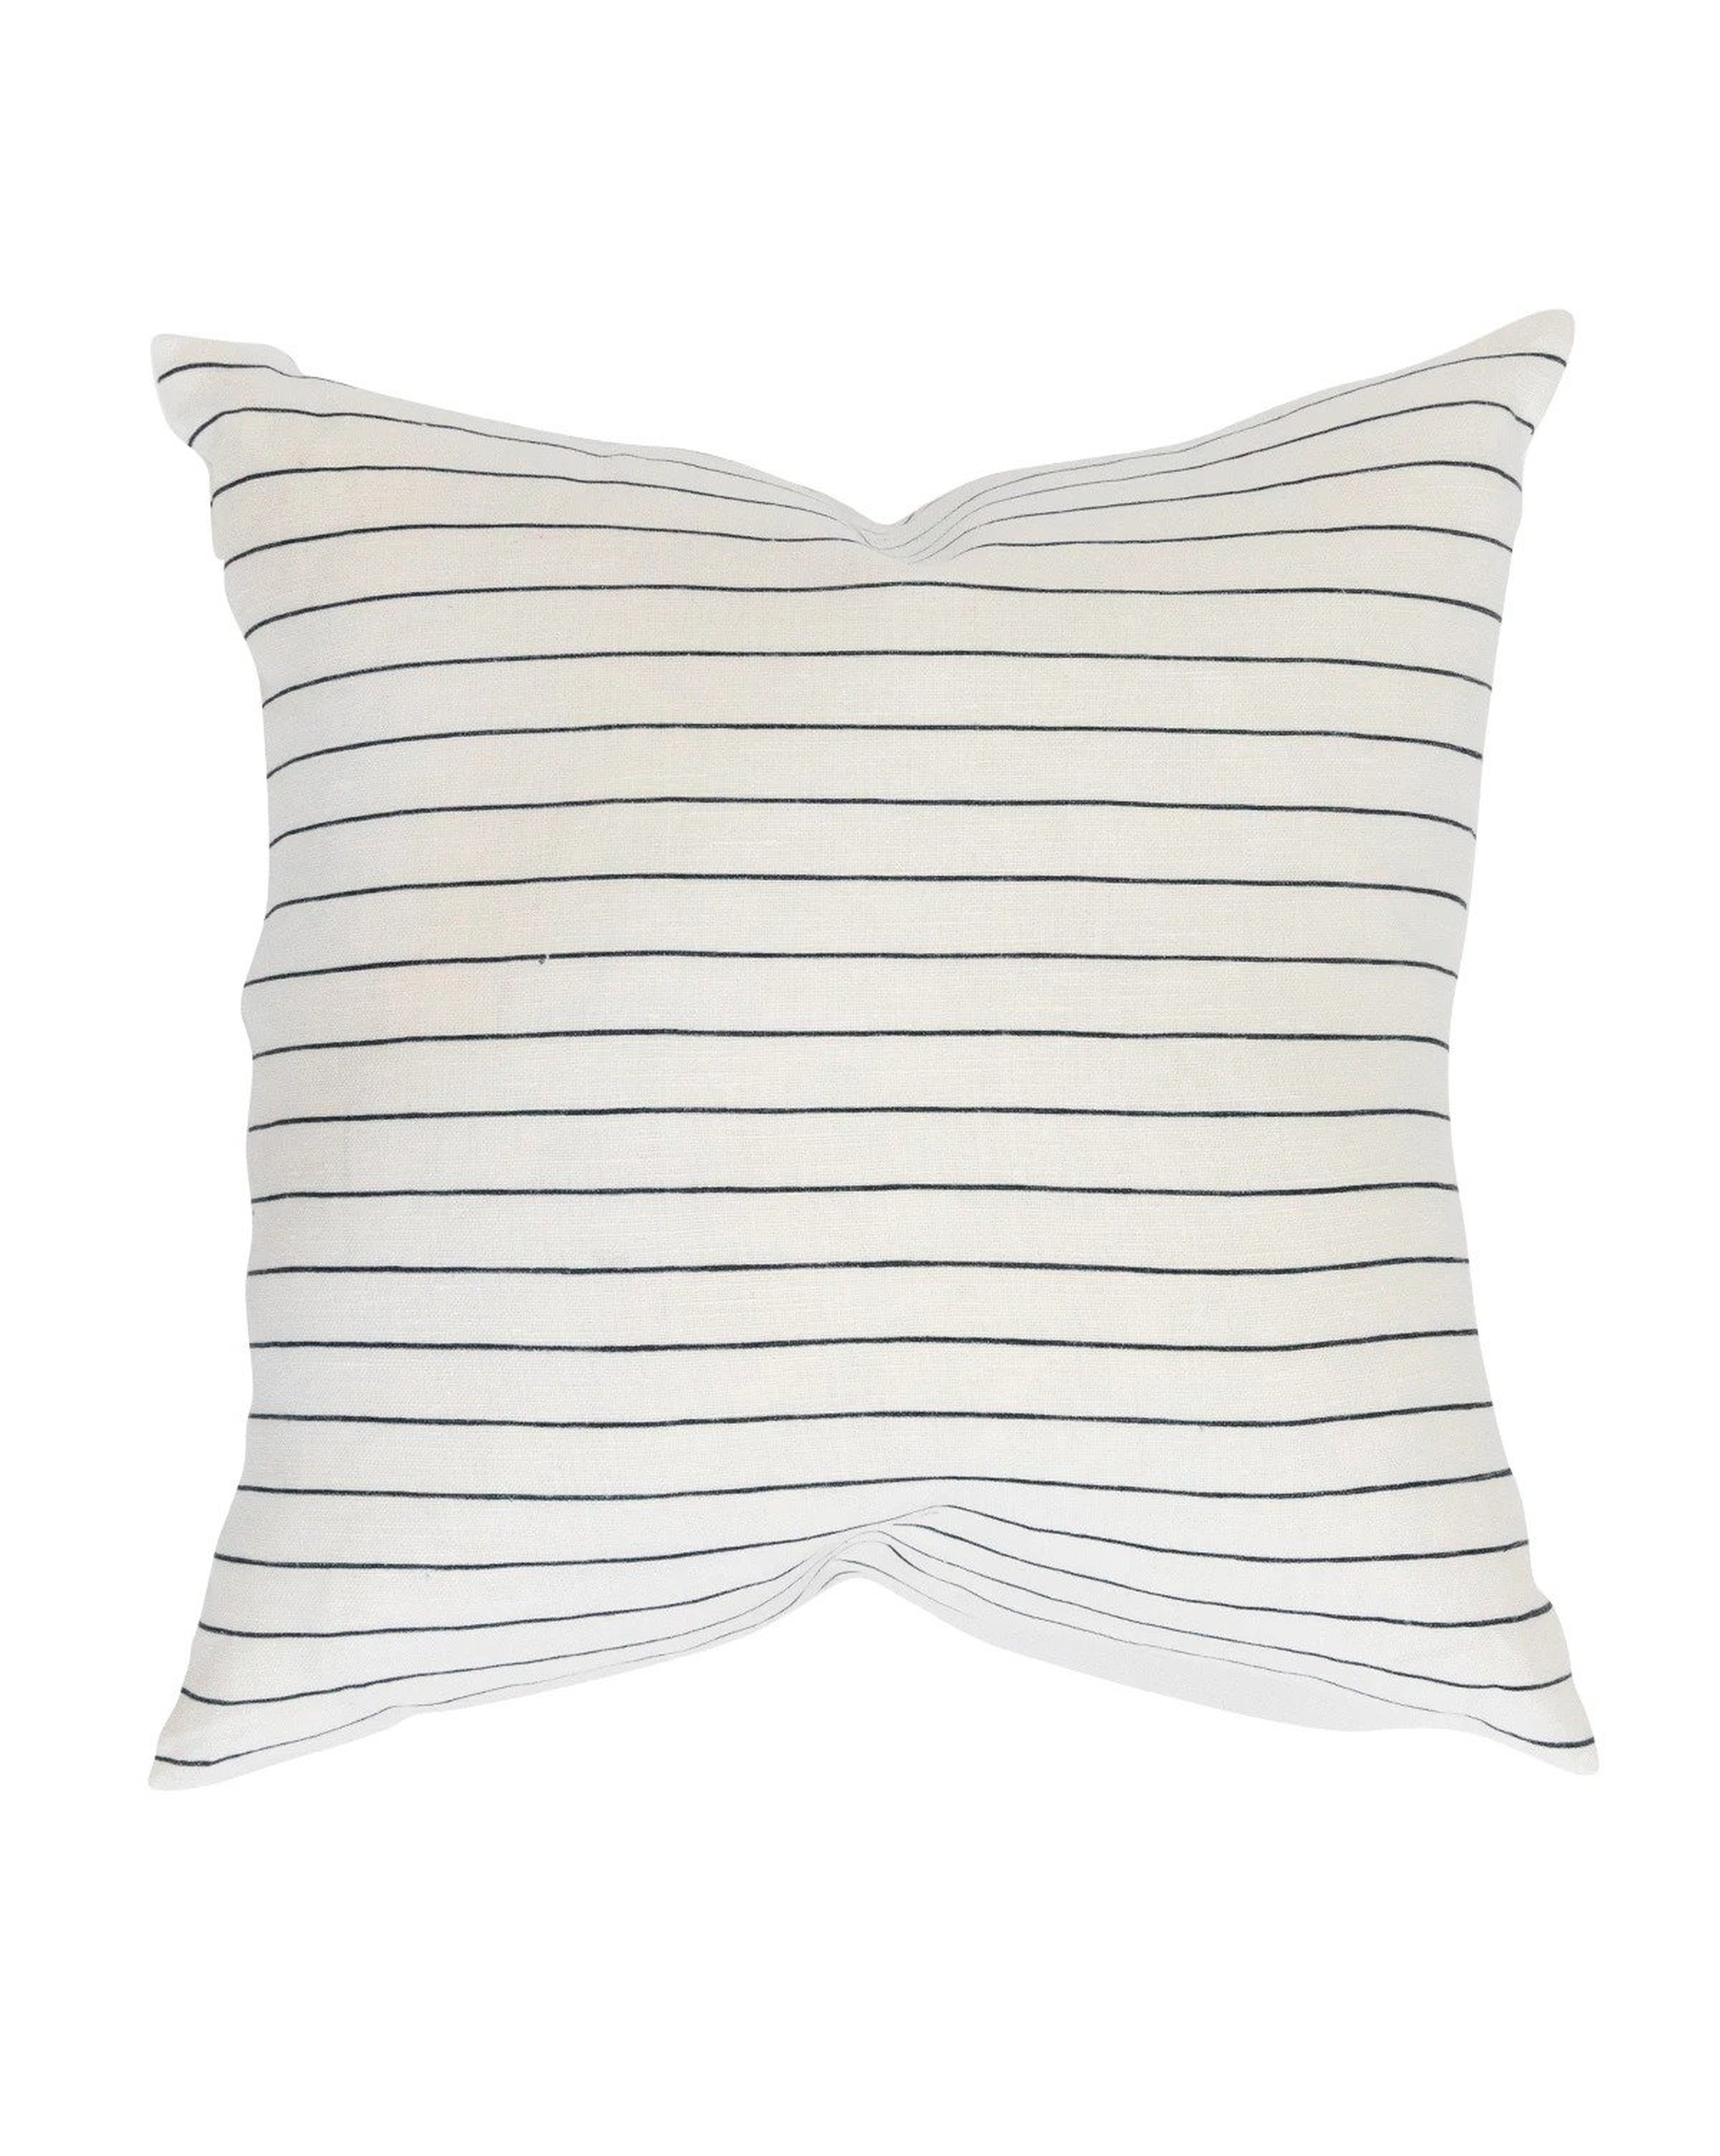 ALDON PILLOW WITH DOWN INSERT - WHITE - 22" x 22" - McGee & Co.